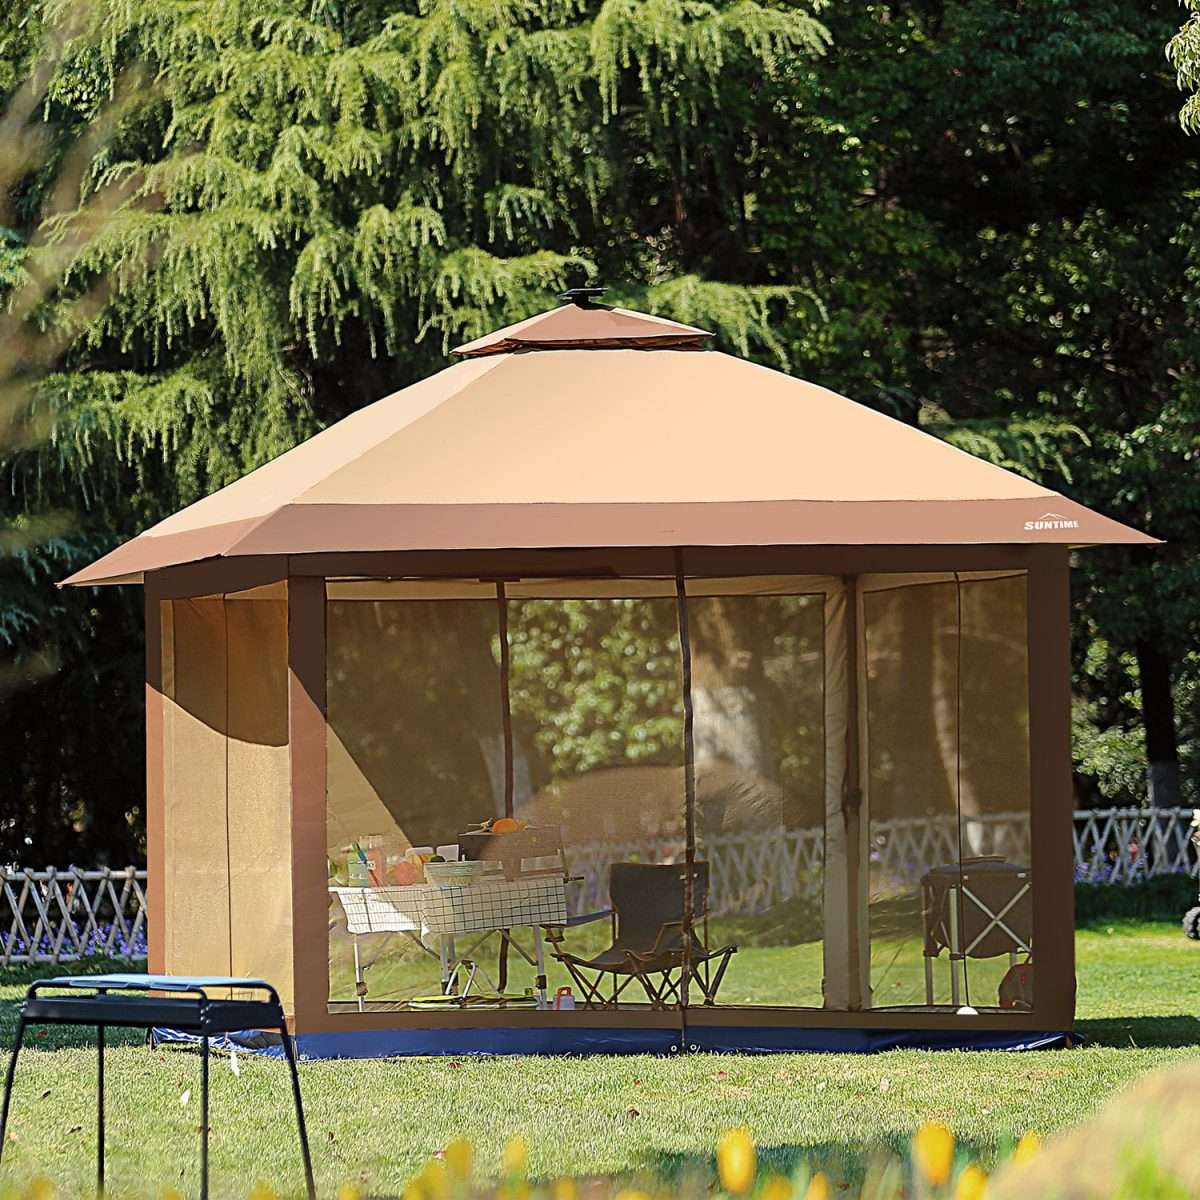 Suntime Outdoor Pop Up Gazebo Canopy with Mosquito Netting and Solar ...